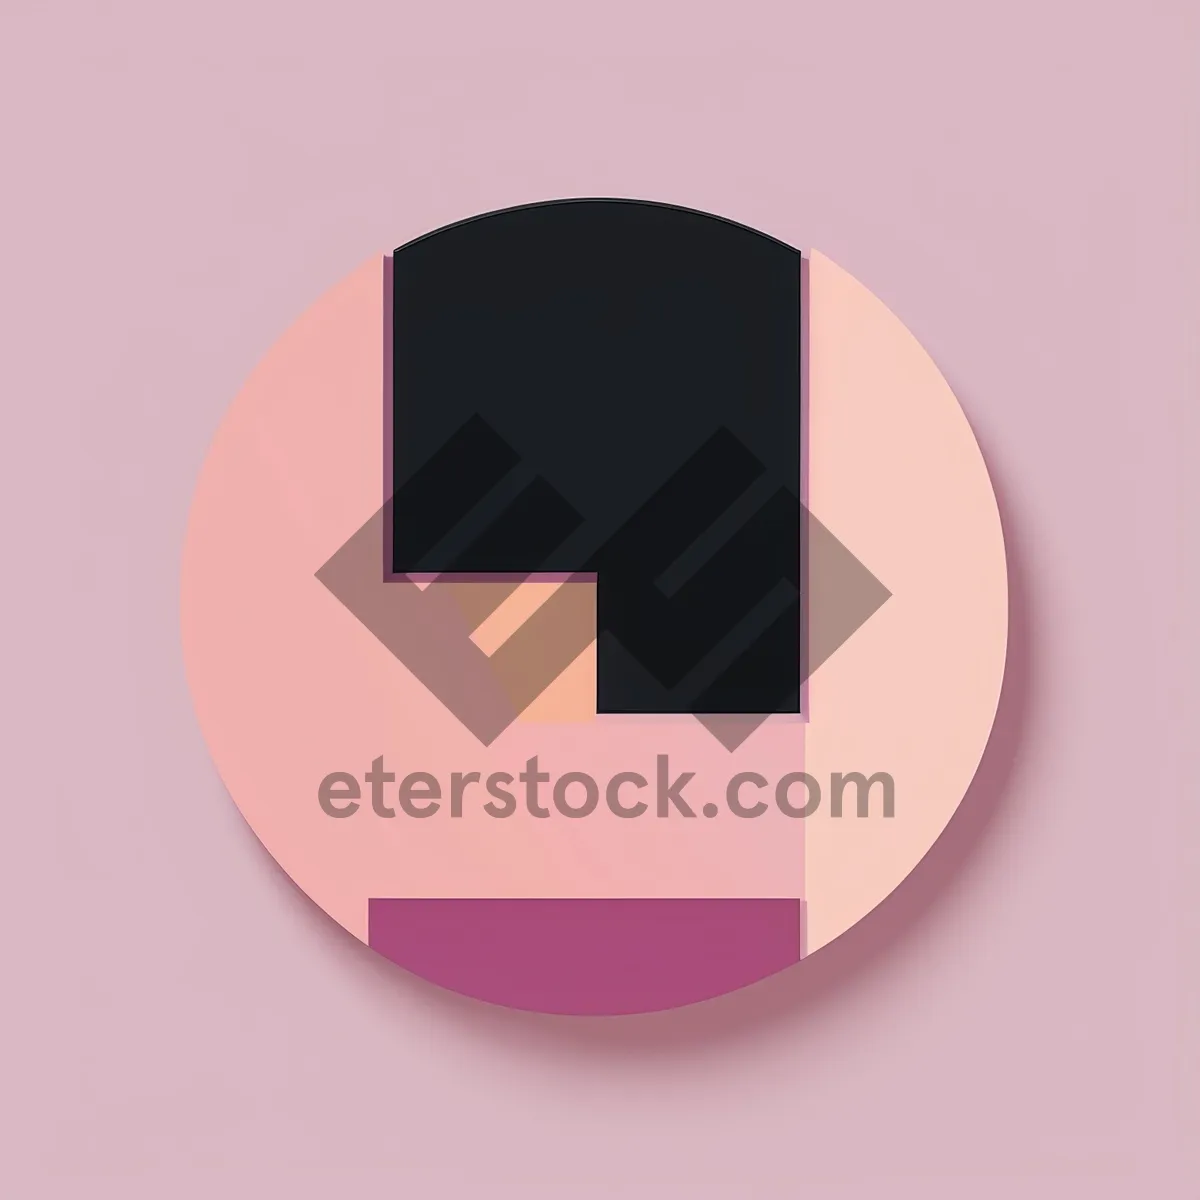 Picture of Shiny Web Button: Glassy Circle Element with Reflection